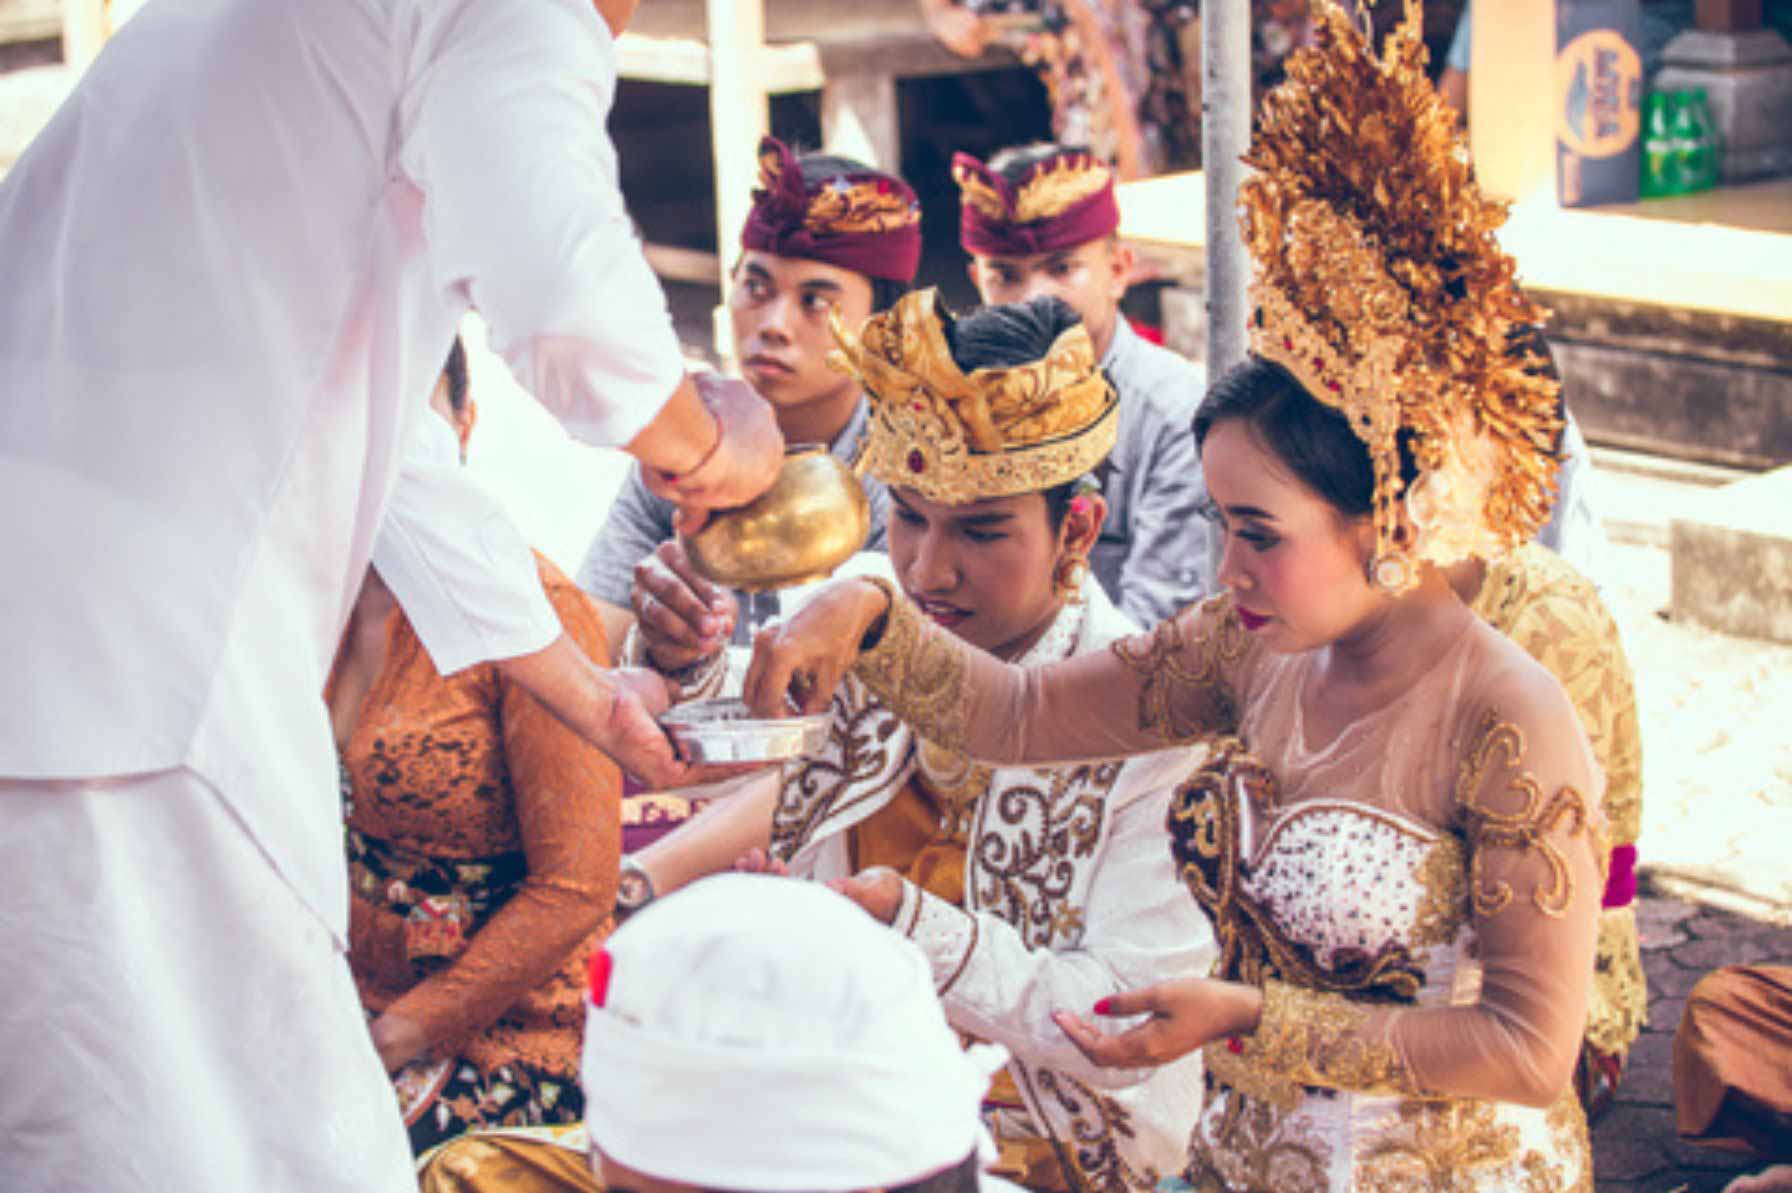 indonesian traditional wedding outfit